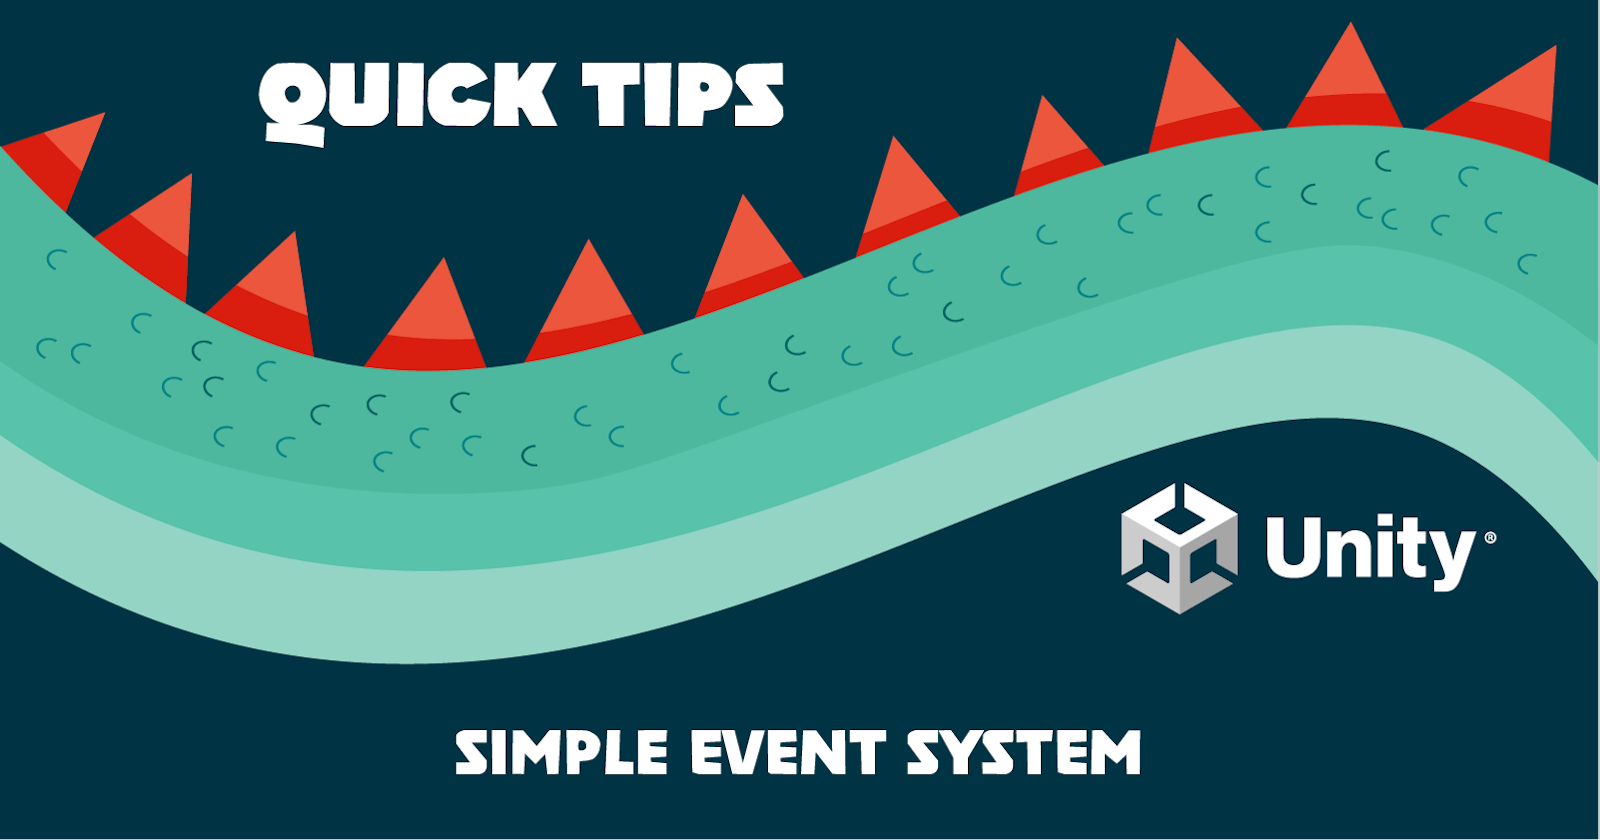 A Simple Event System for Unity